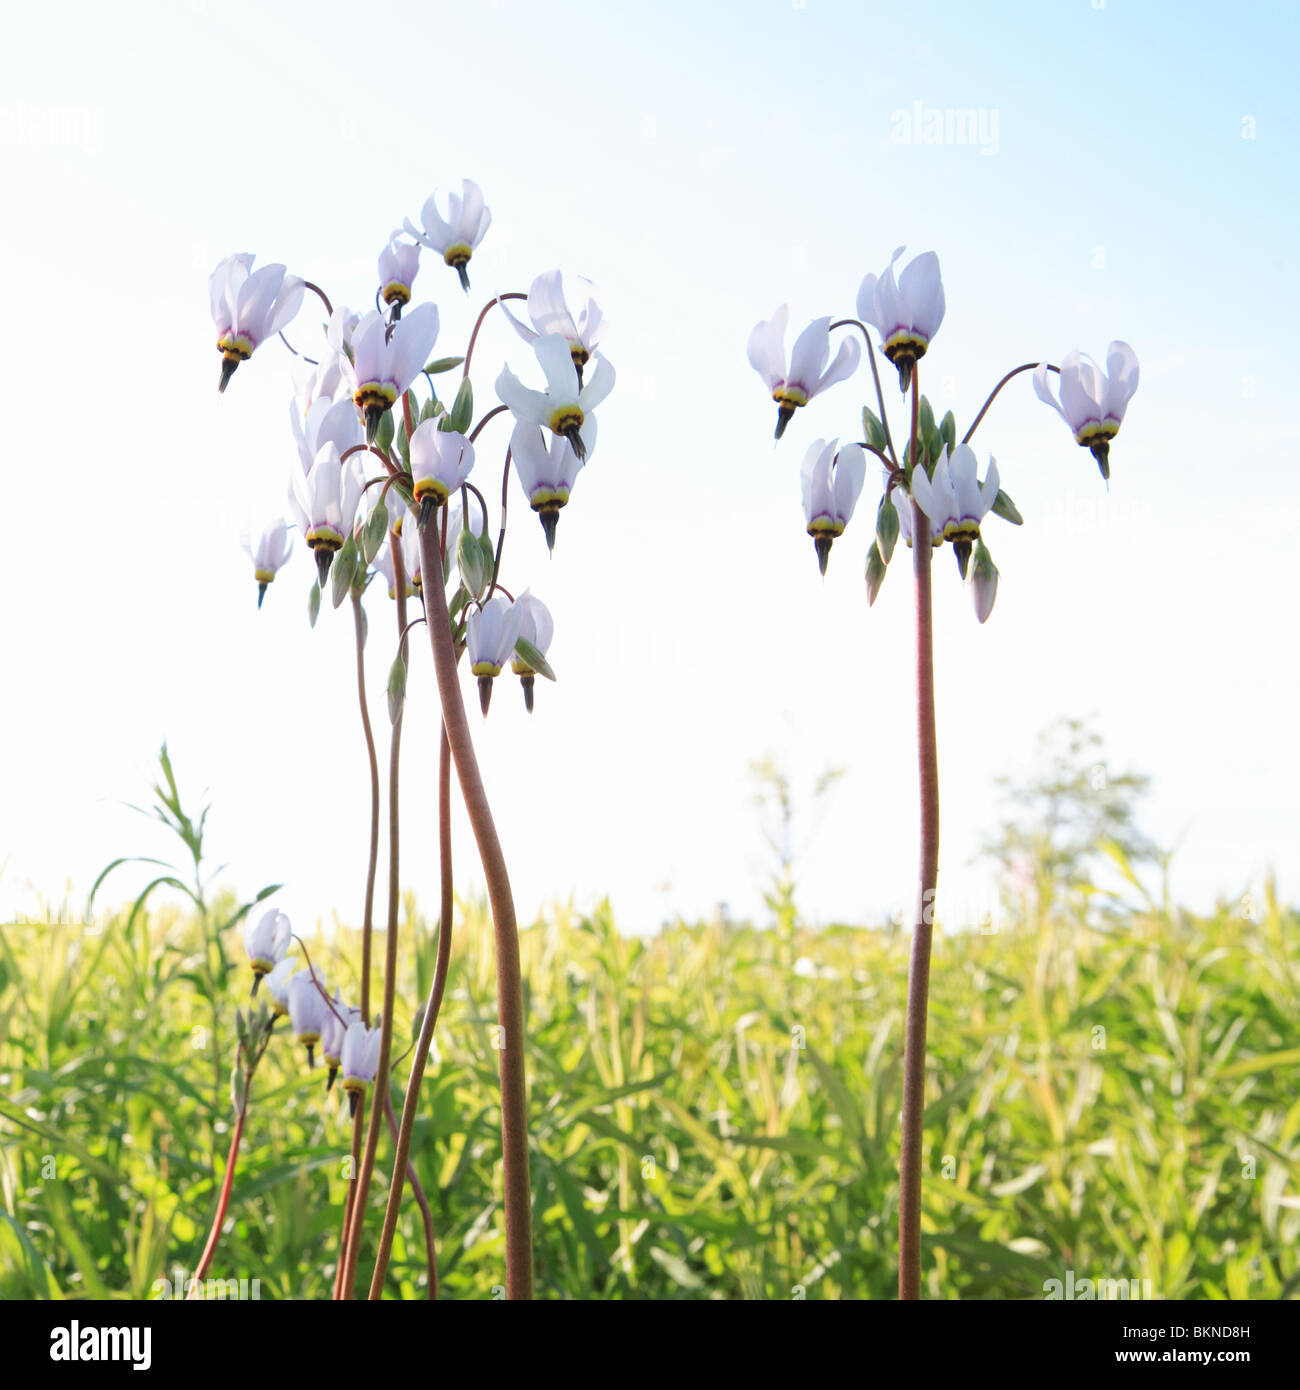 SHOOTING STAR, DODECATHEON MEADIA, NORTHERN ILLINOIS PRAIRIE LATE SUMMER FLOWERS IN NORTHERN ILLINOIS PRAIRIE , MIDWESTERN USA Stock Photo